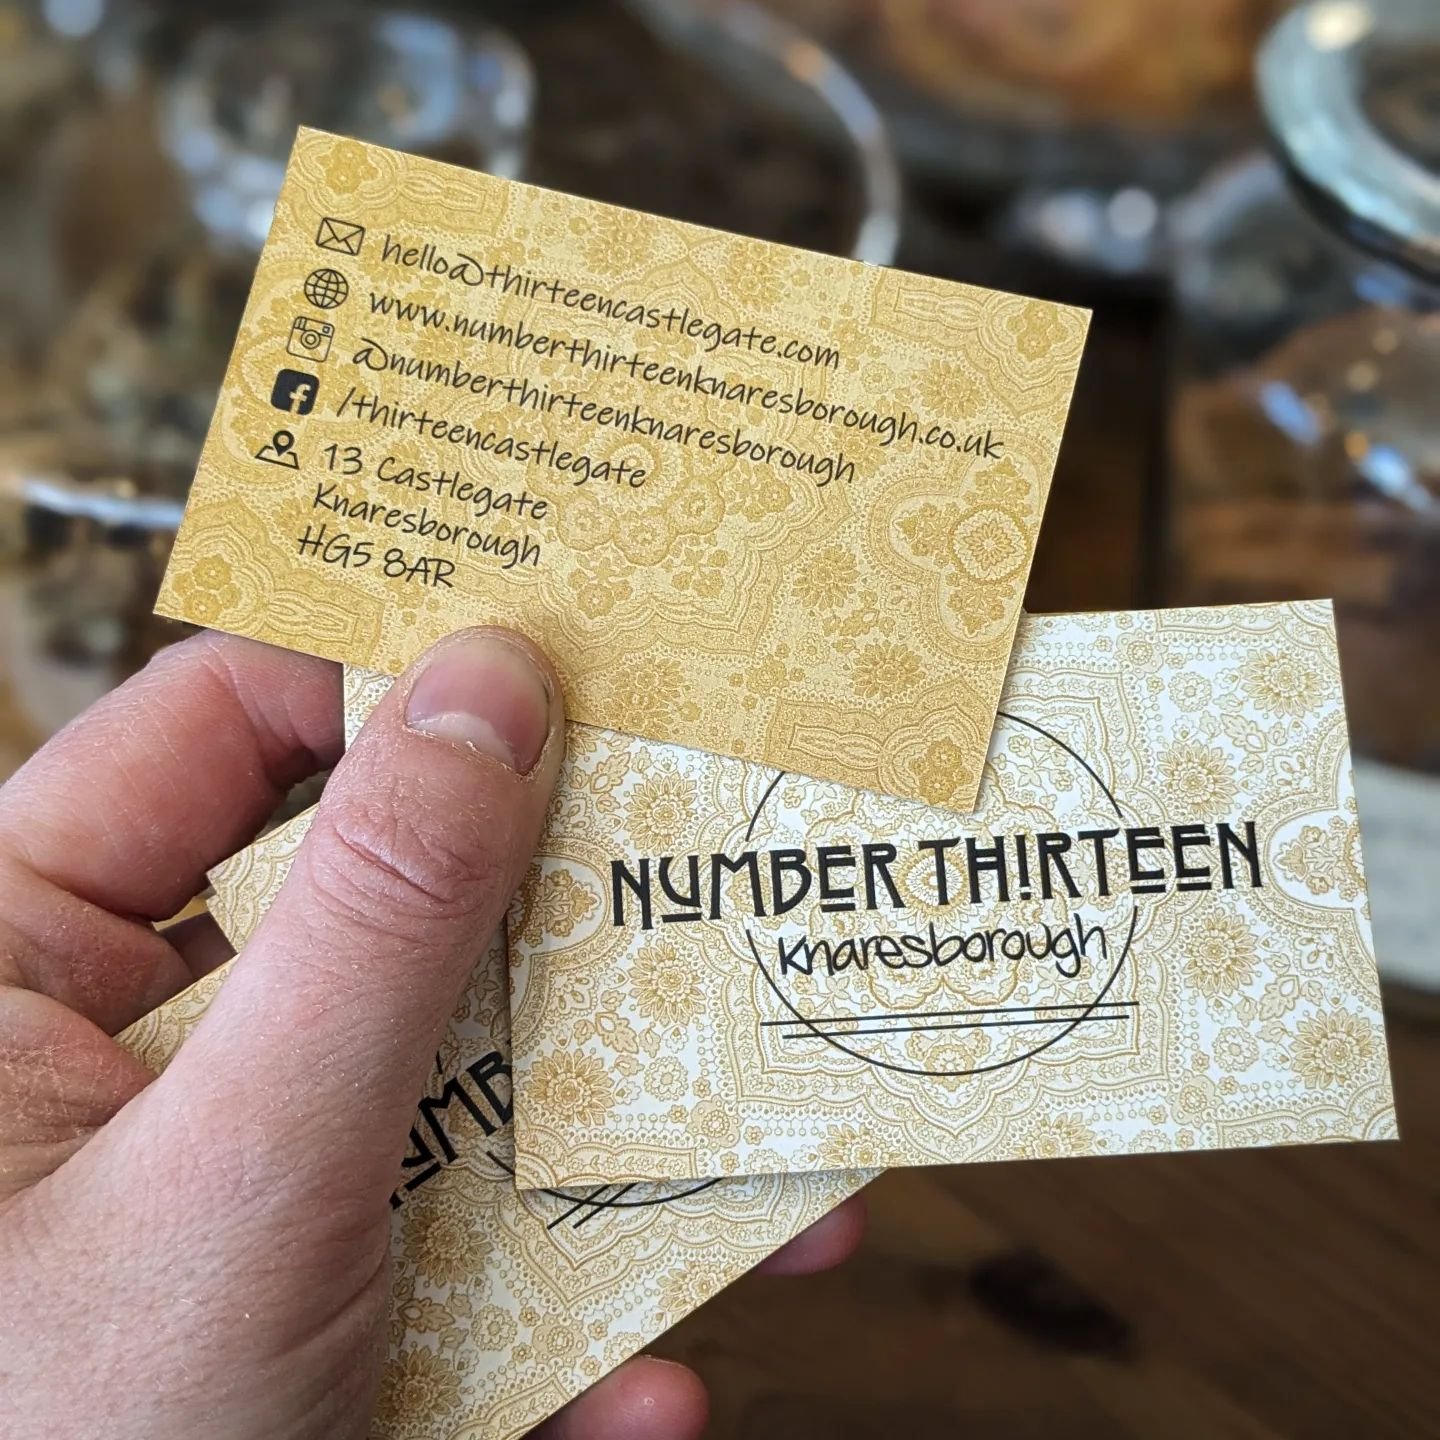 Thanks to @sidhorner for our lovely new business cards and top up of loyalty cards - we seem to be flying through them recently!